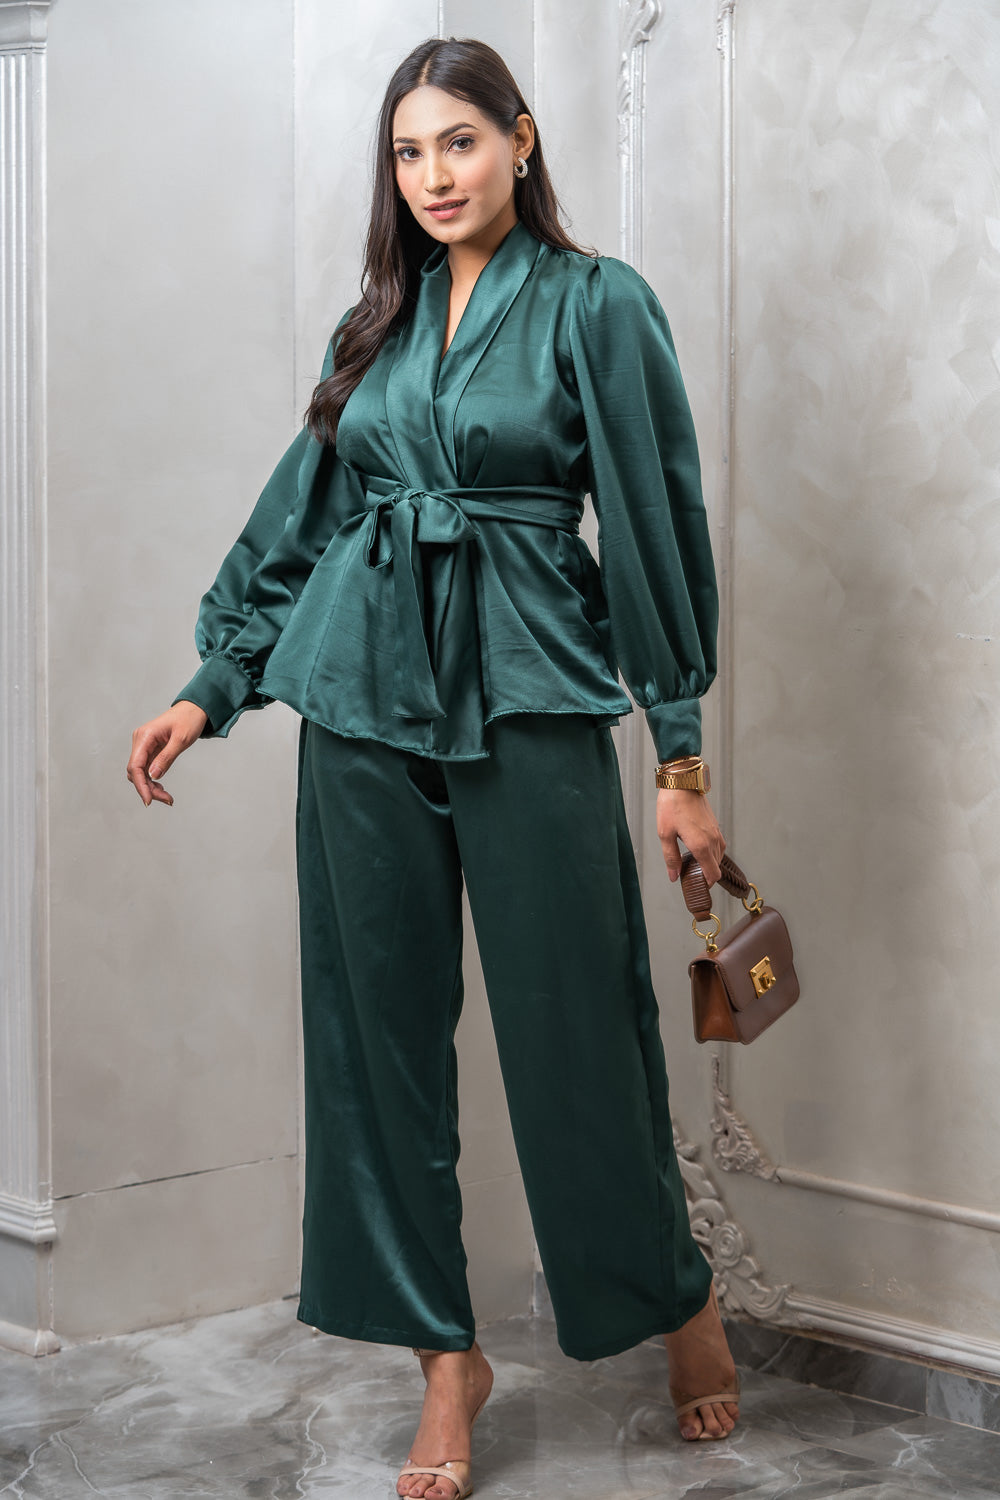 Bottle Green Satin Tie Up Top With Wide Leg Pants